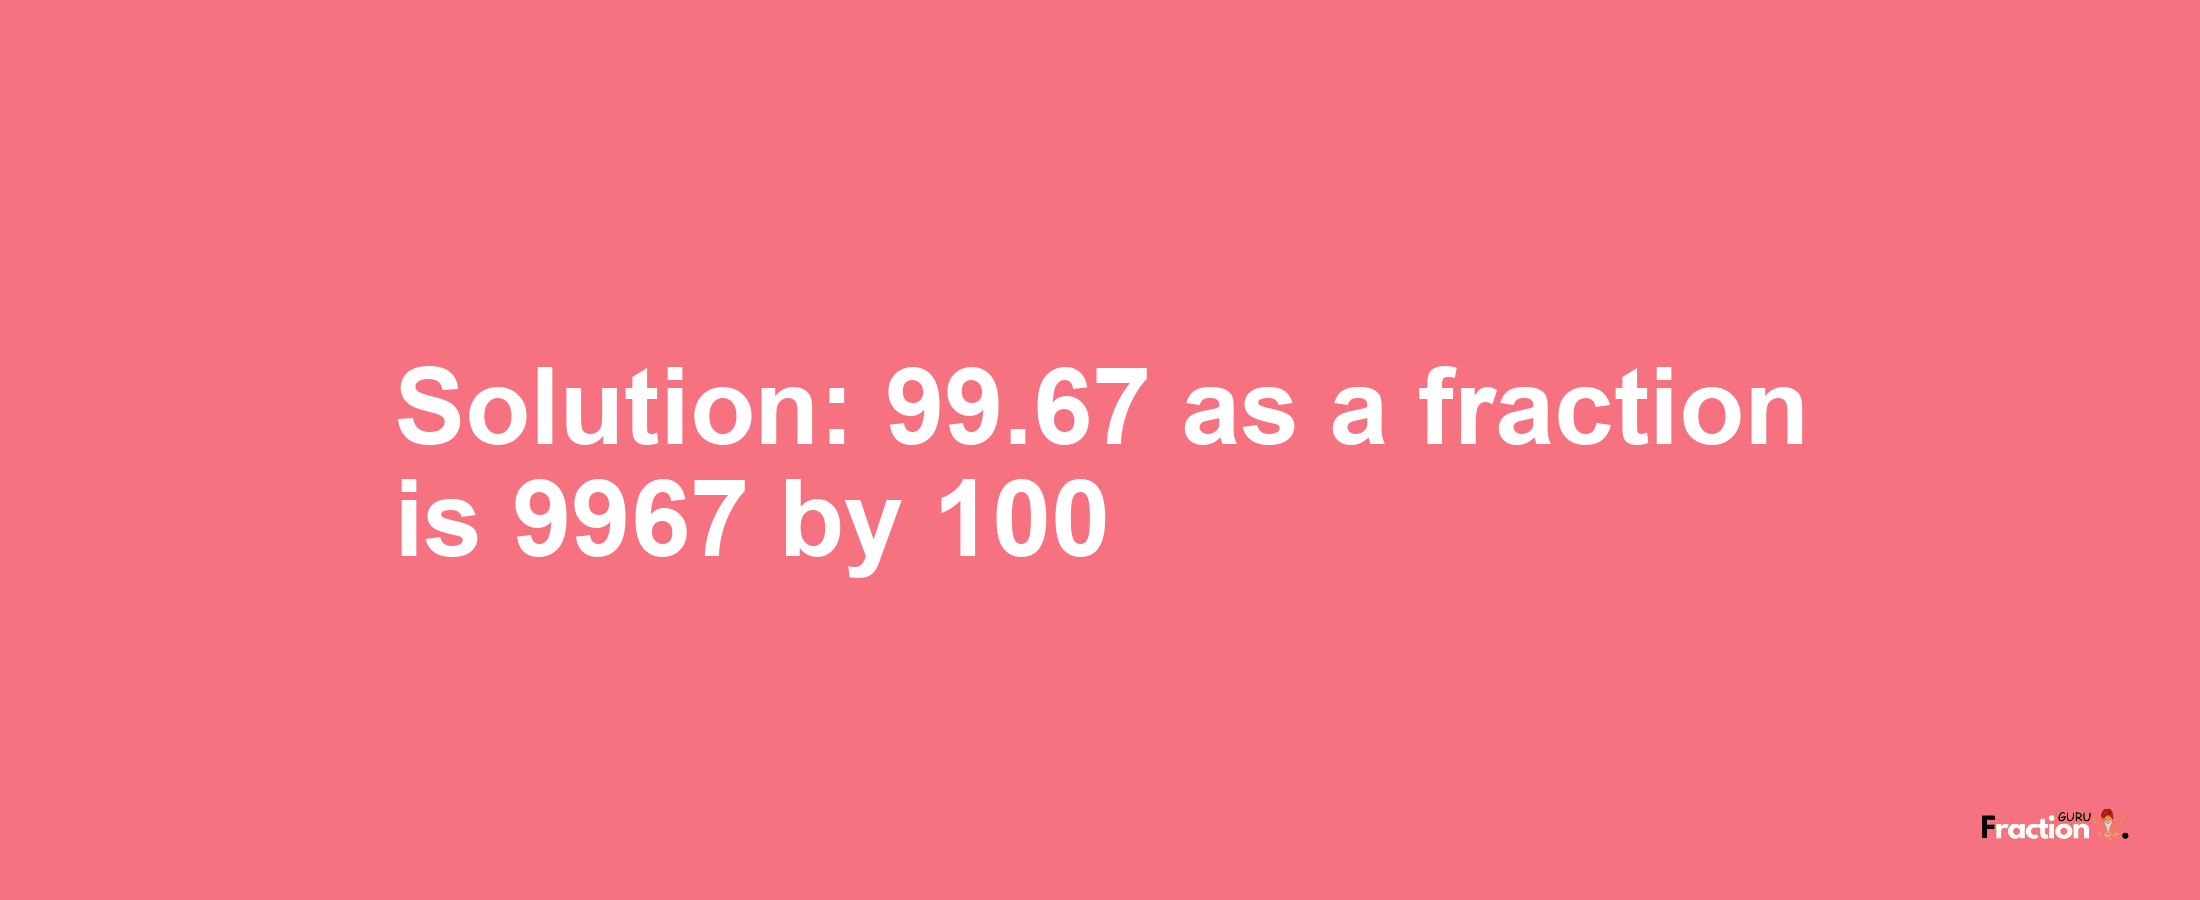 Solution:99.67 as a fraction is 9967/100